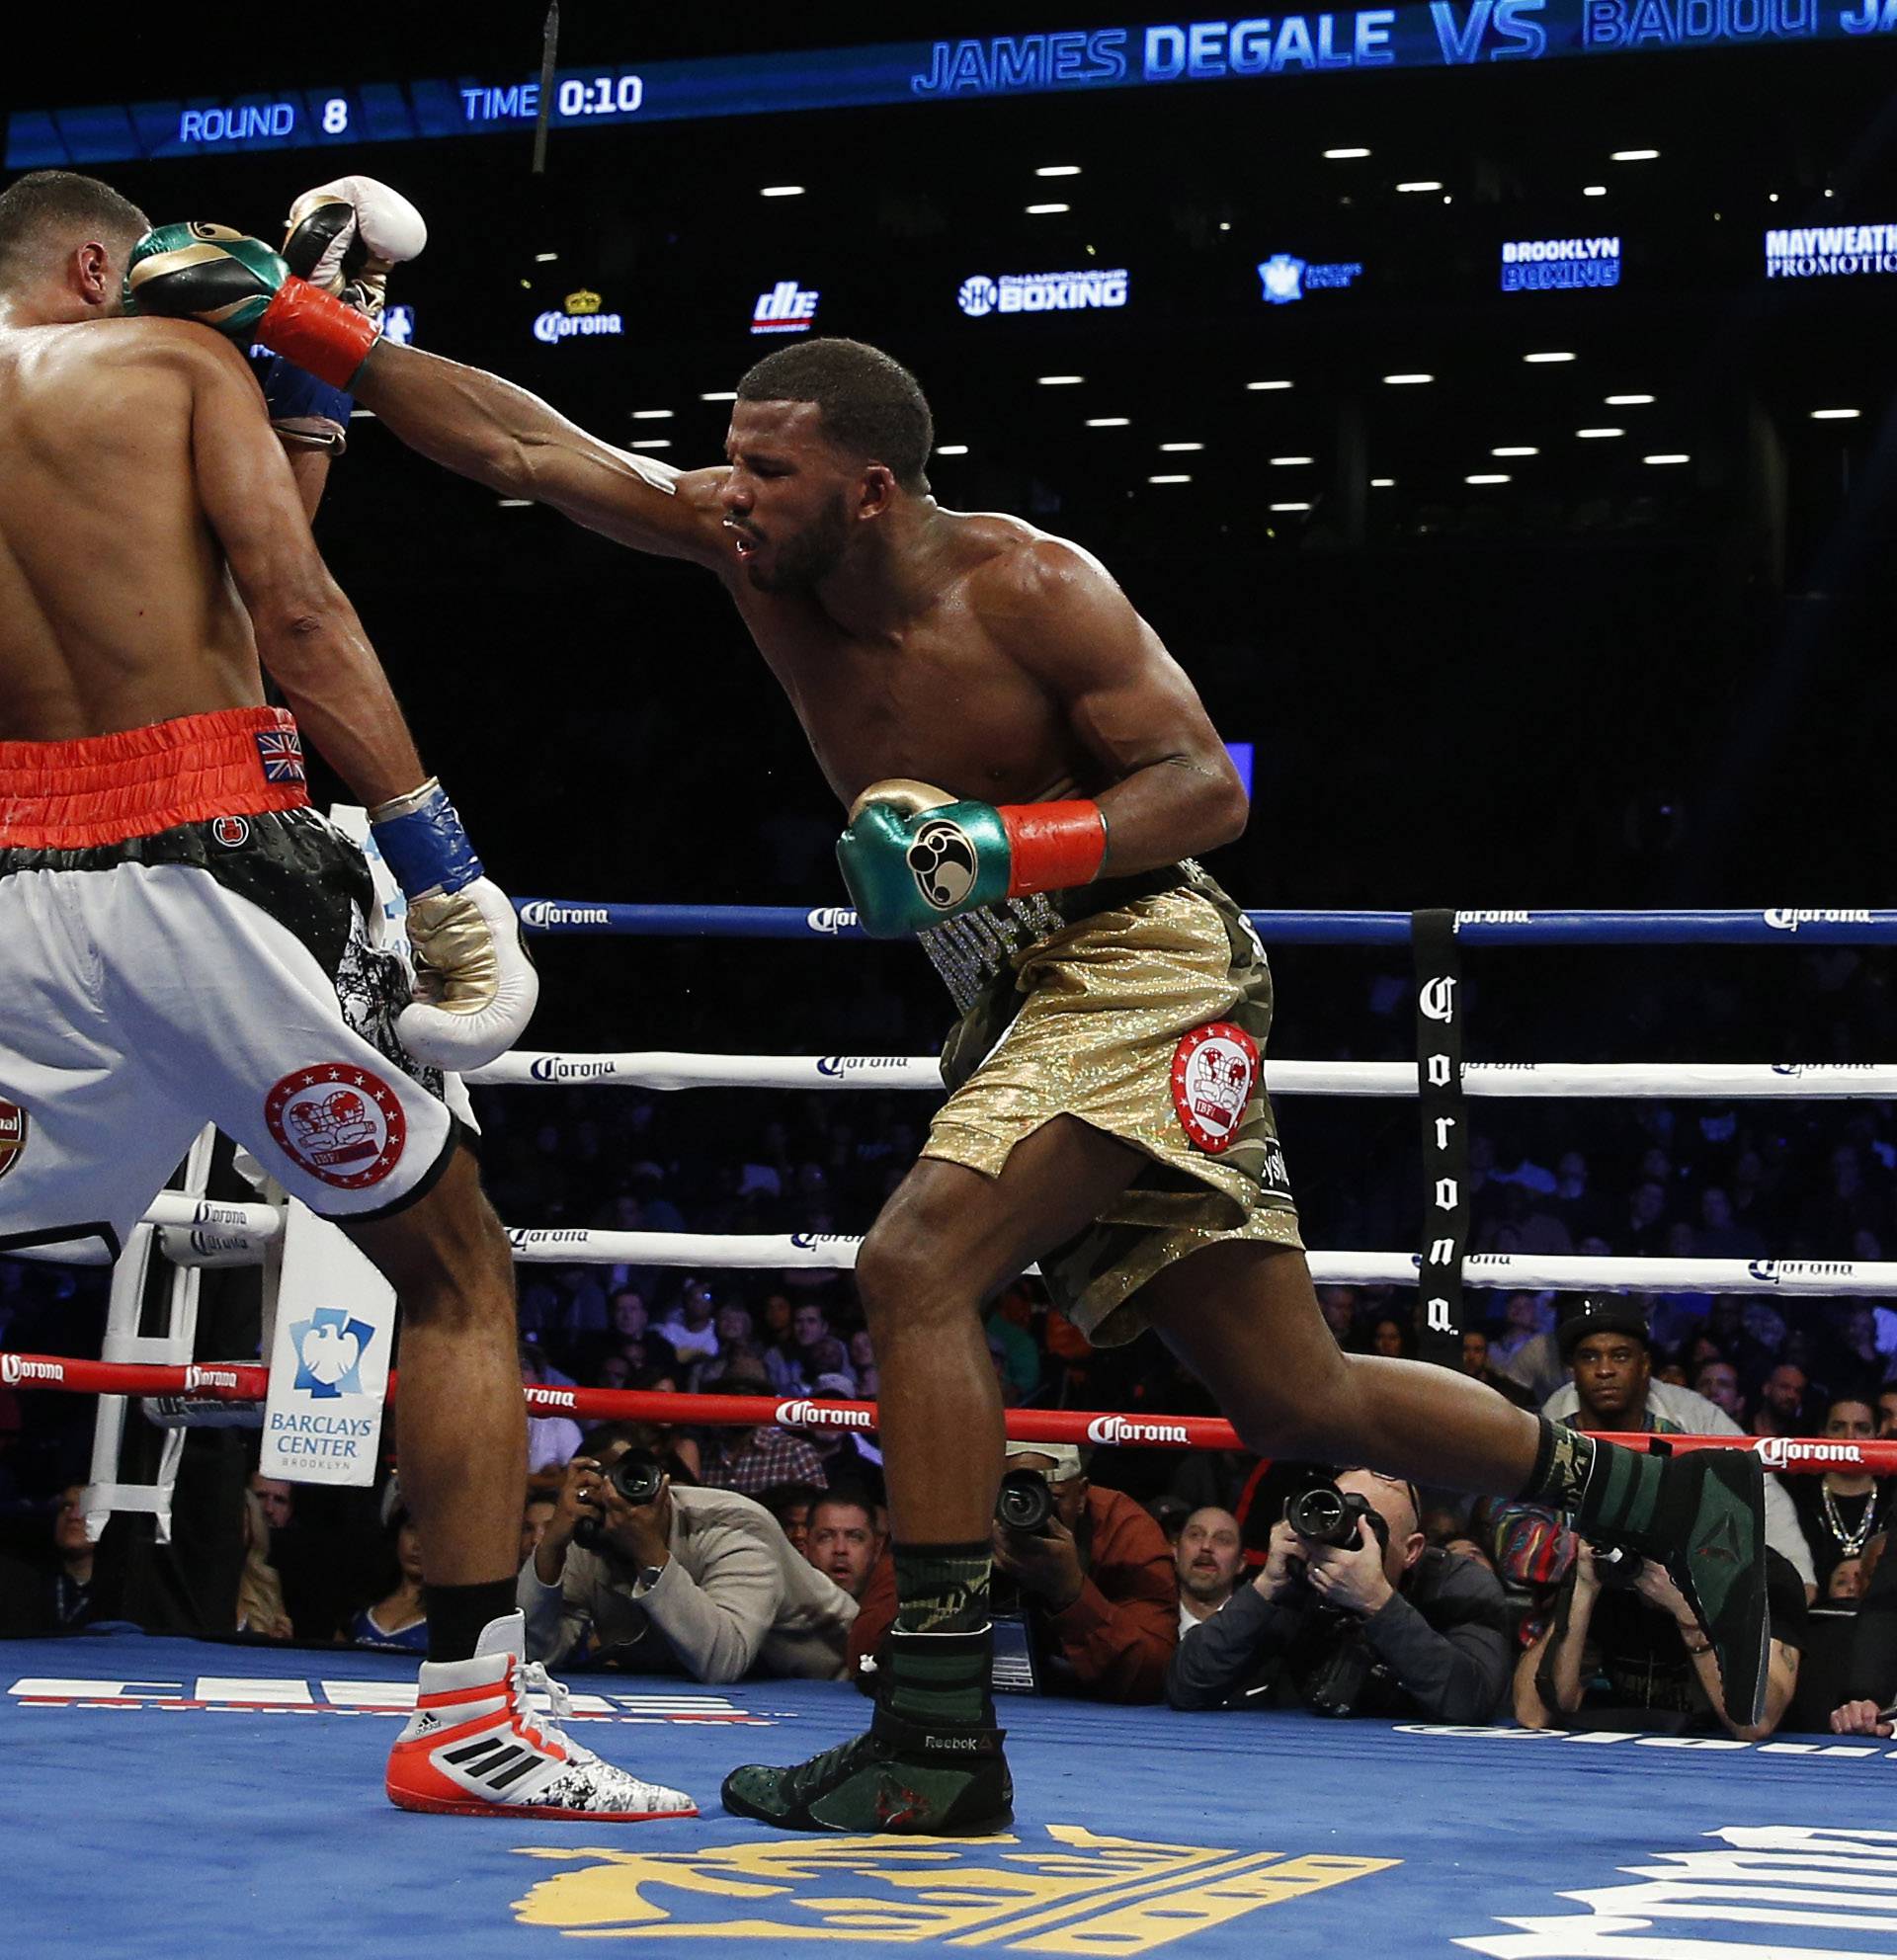 James DeGale in action against Badou Jack. An object is seen on the ring floor during the fight. According to reports,DeGale lost a tooth during the match